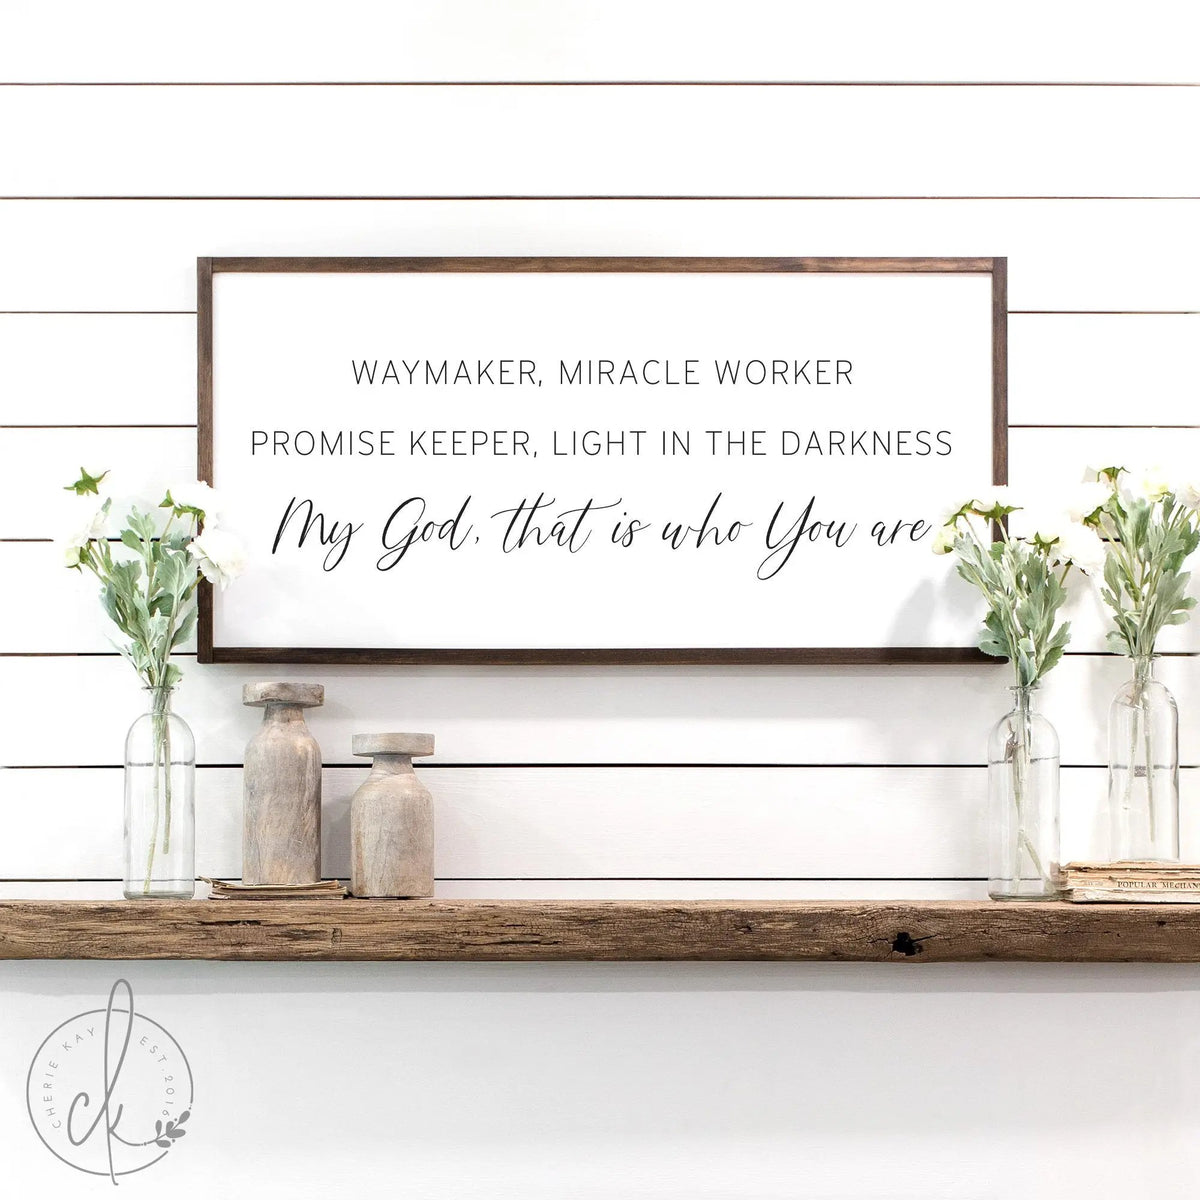 Inspirational sign | Waymaker sign | living room wall decor | waymaker, miracle worker sign | wood sign | worship song sign